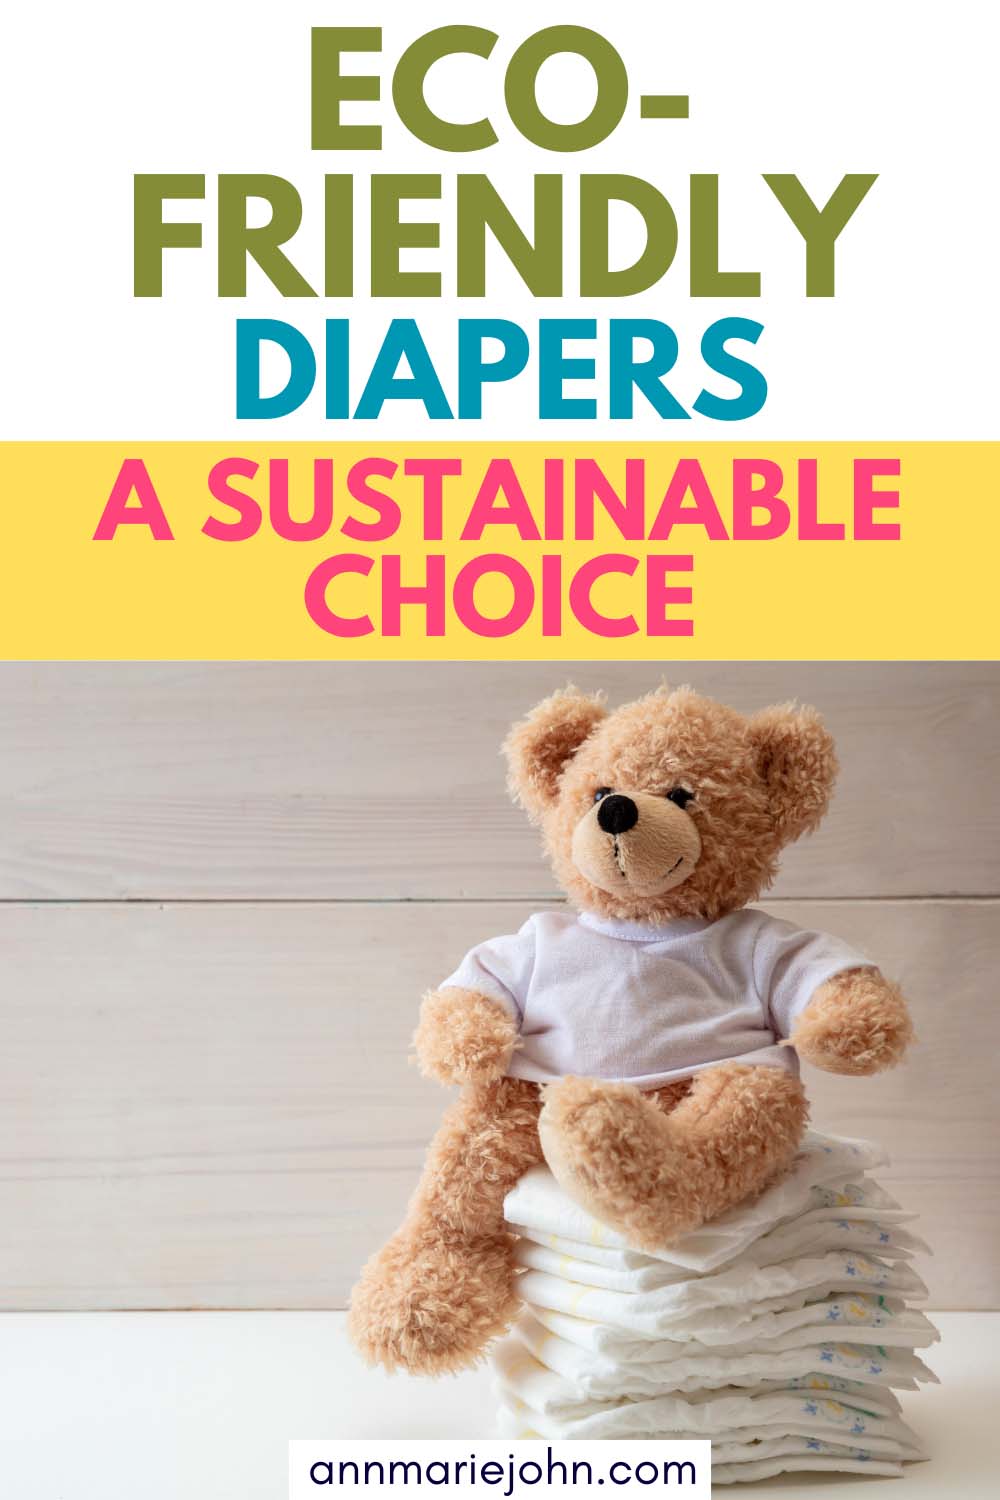 Eco-Friendly Diapers - A Sustainable Choice